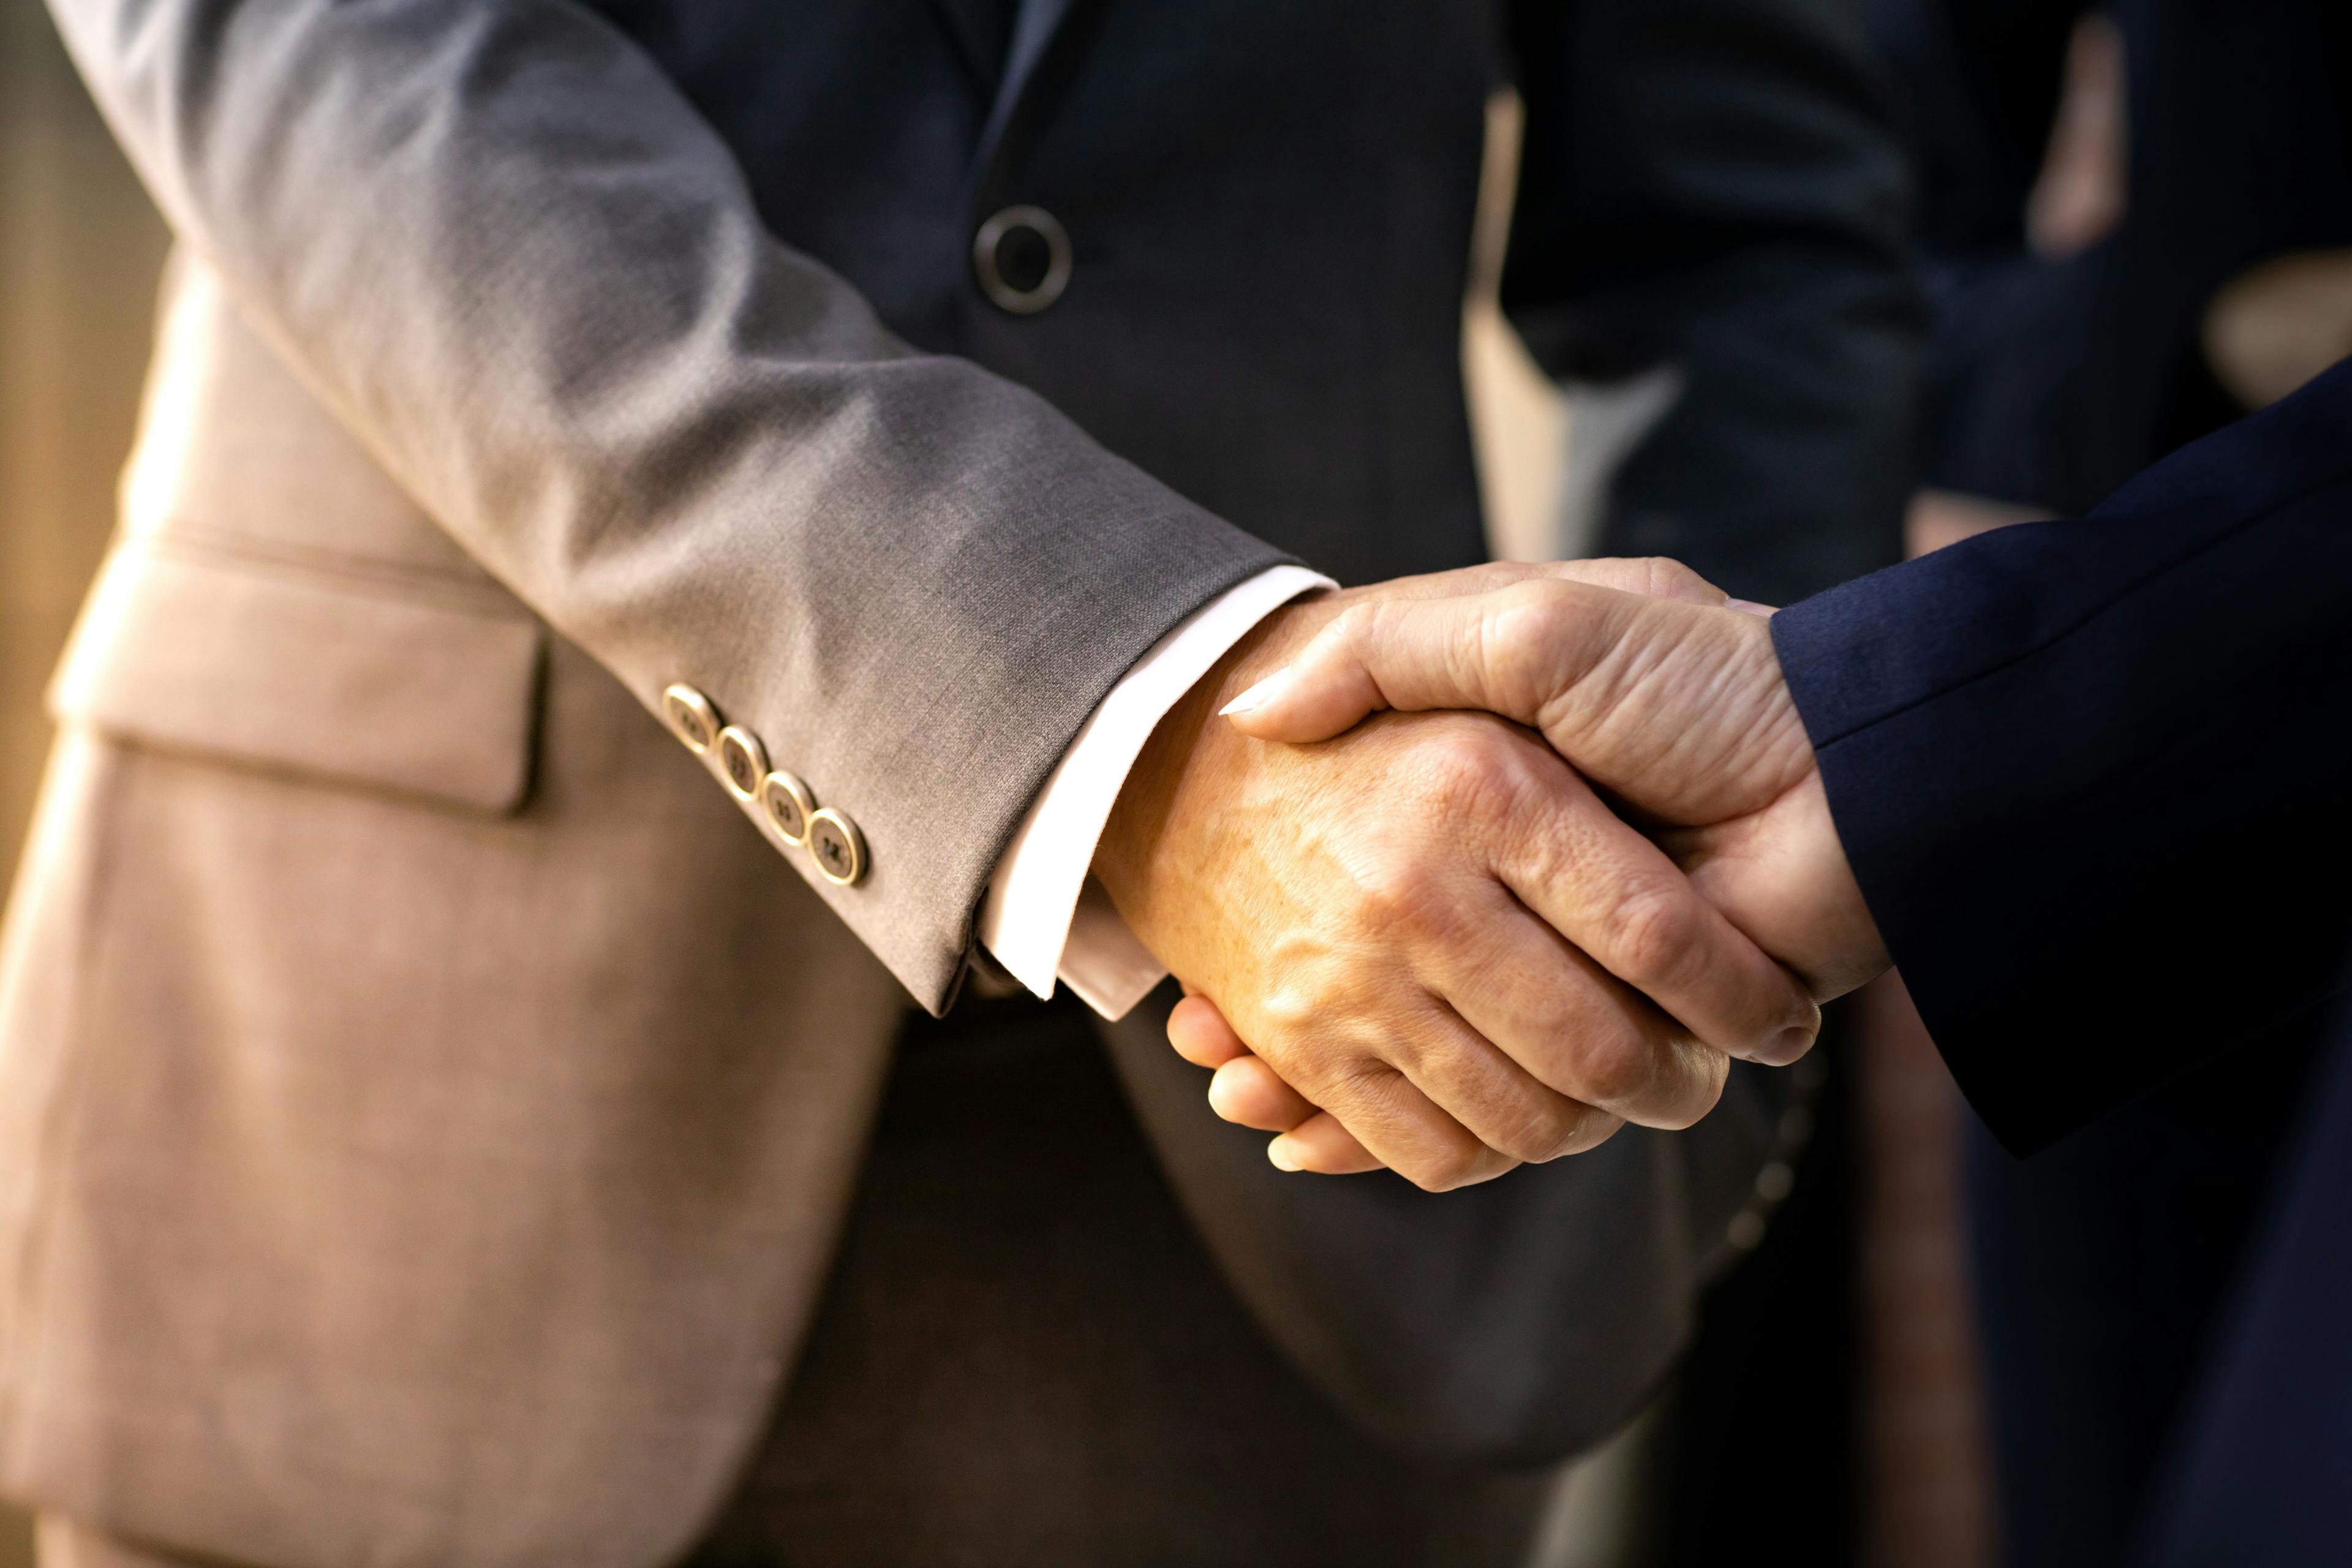 Mergers remain strong: ©Vitchie81 - stock.adobe.com